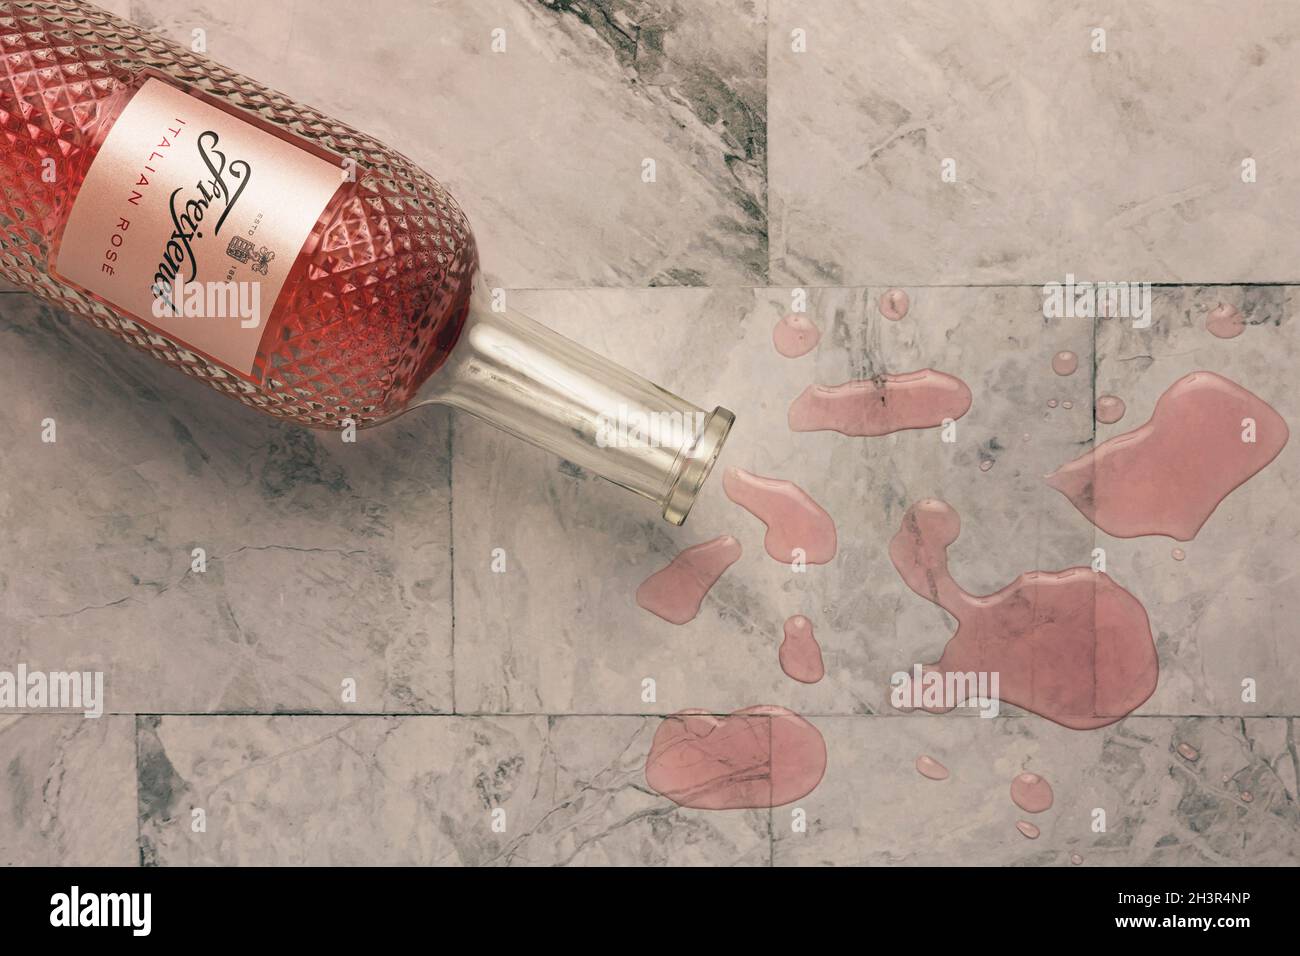 Accident happens. Spilled rose wine on the grey marble floor or kitchen worktop, top view, flatlay. Stock Photo